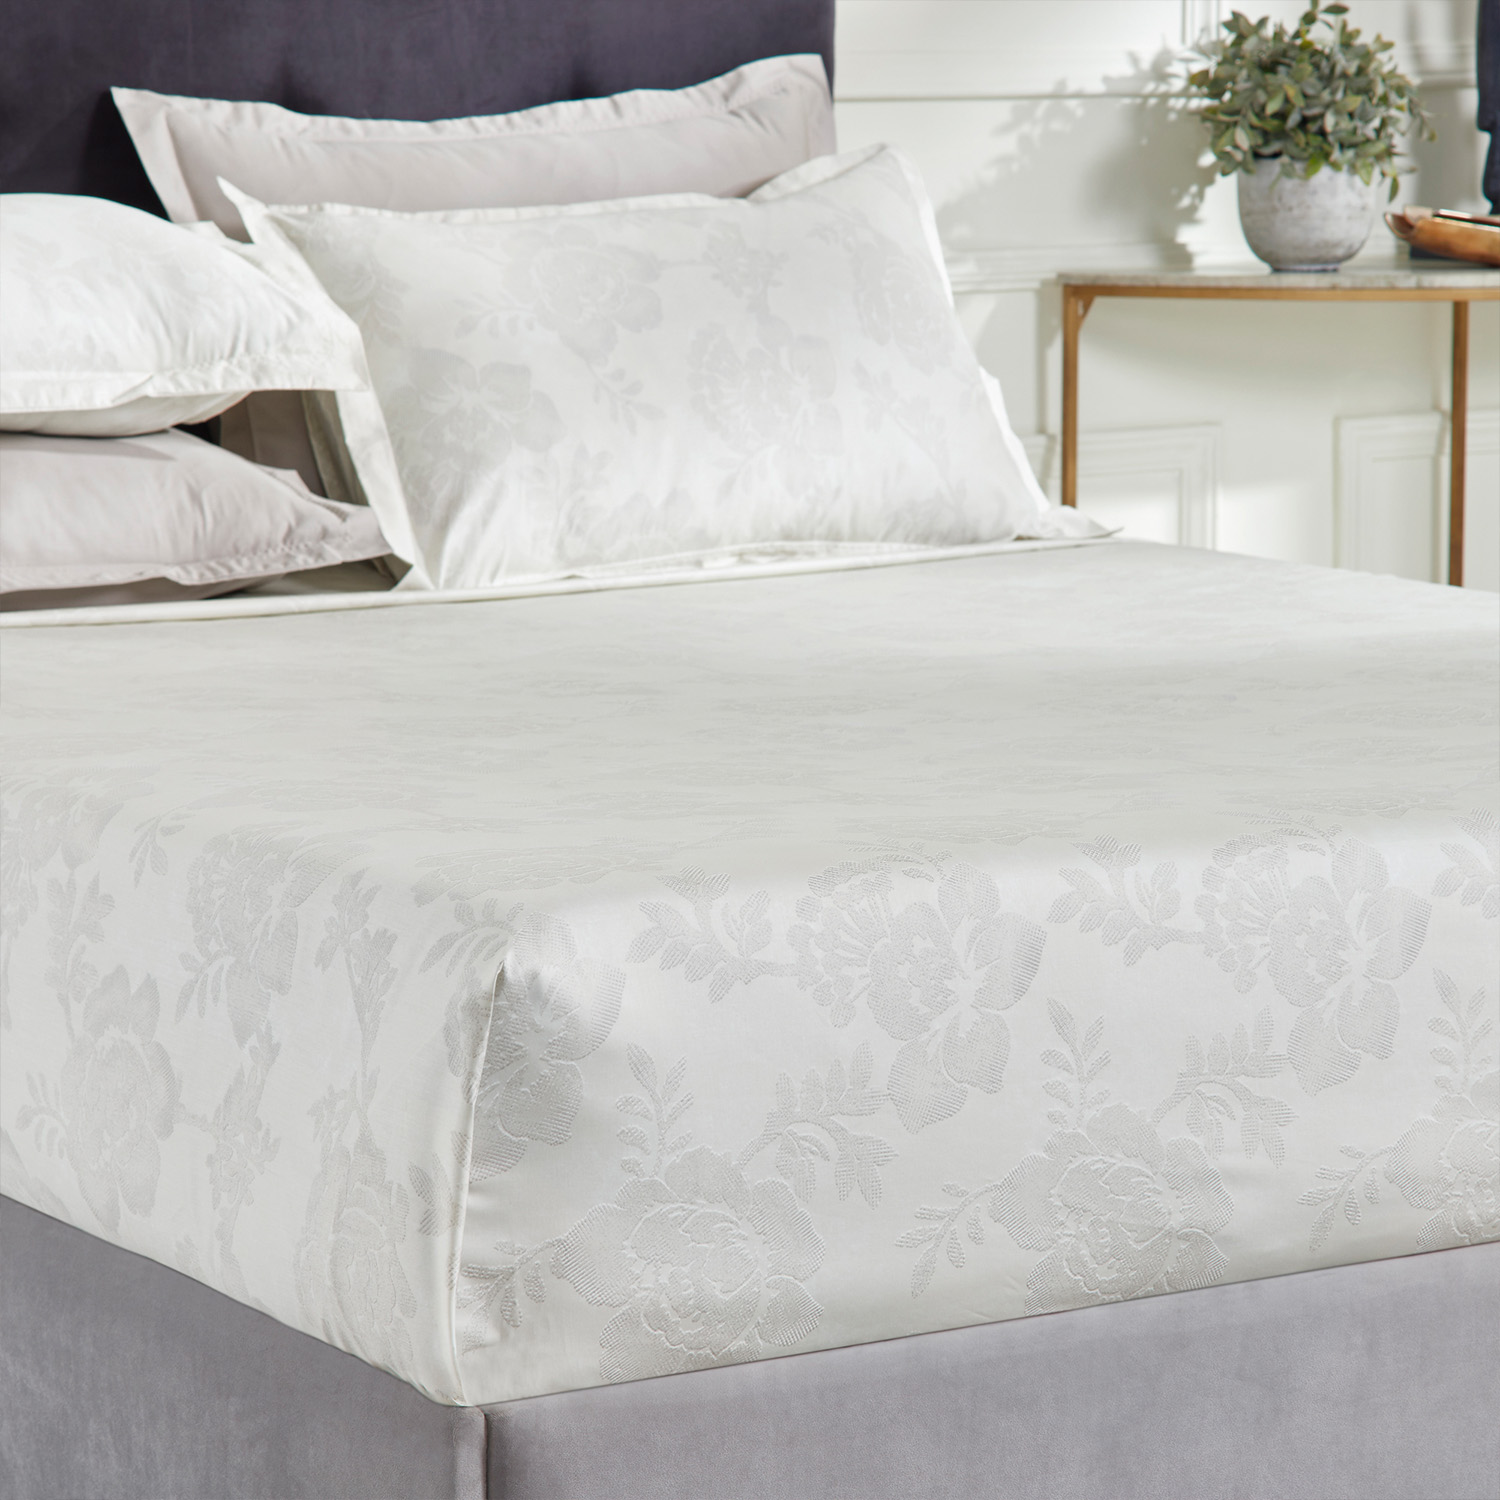 Finding the Perfect Double Bed Sheets Online